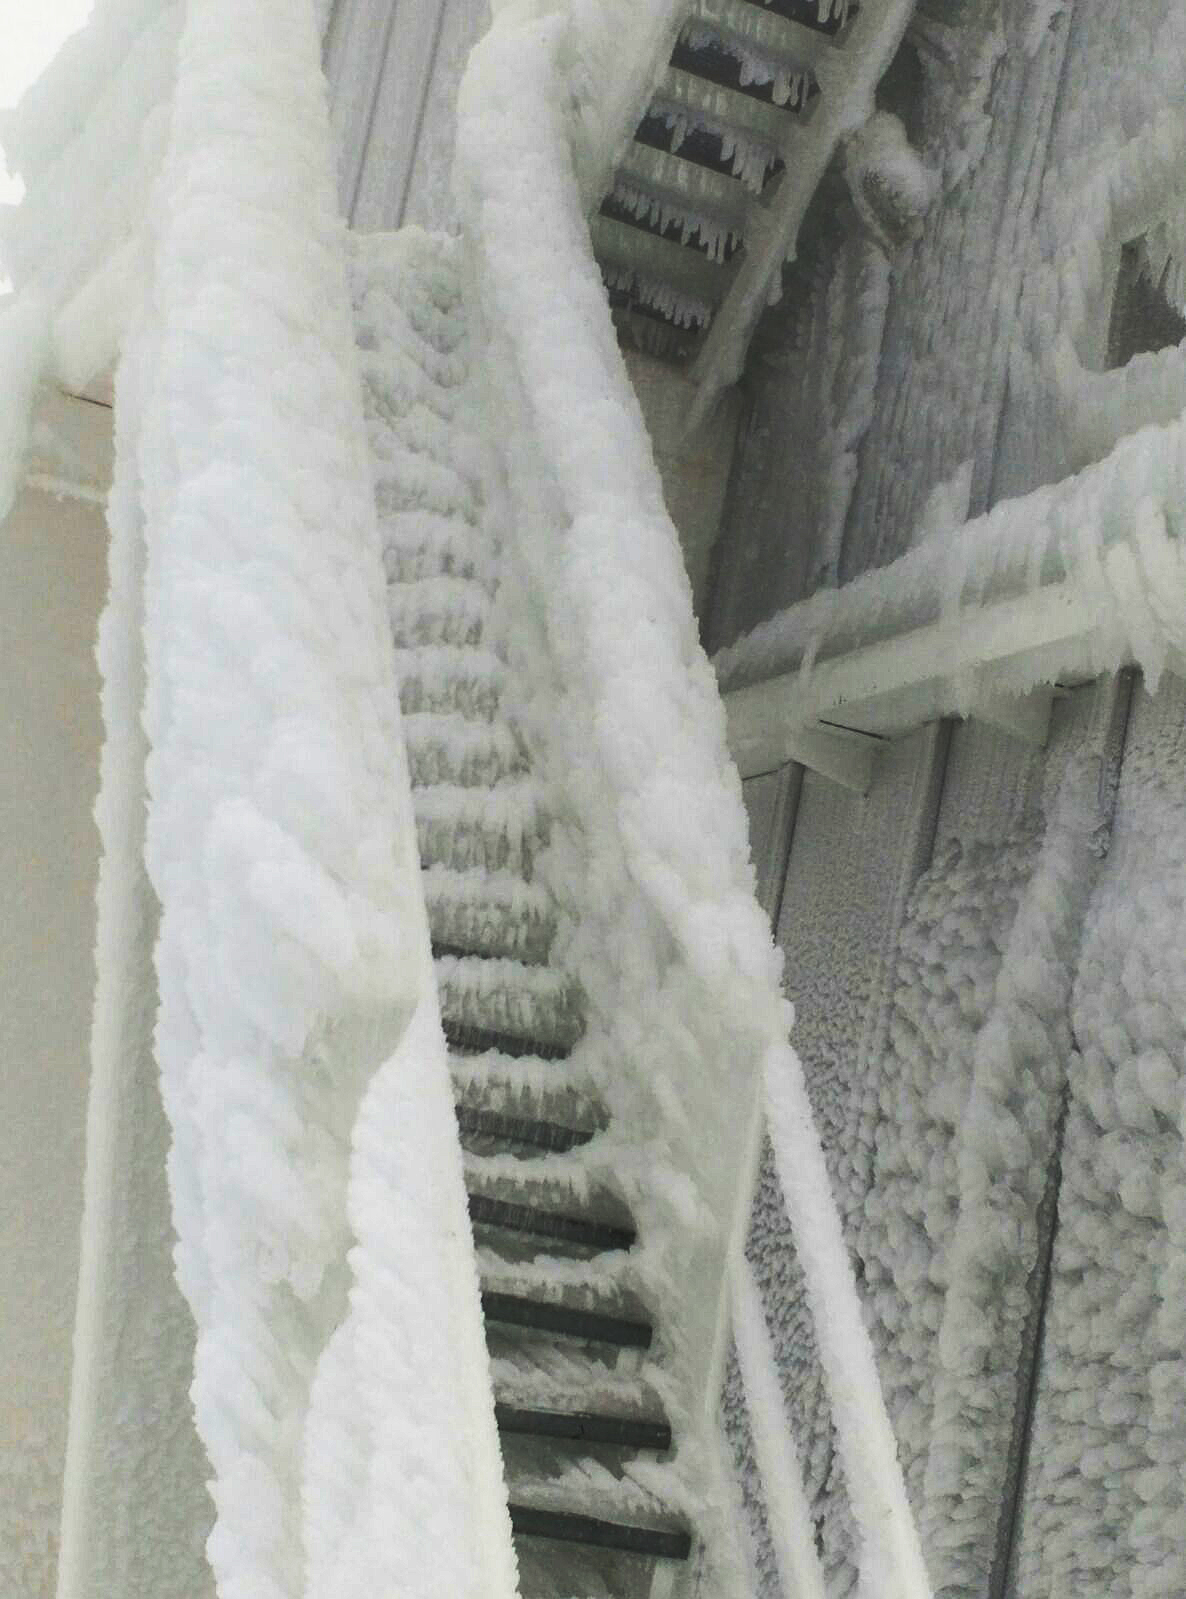 Staircase covered in thick ice